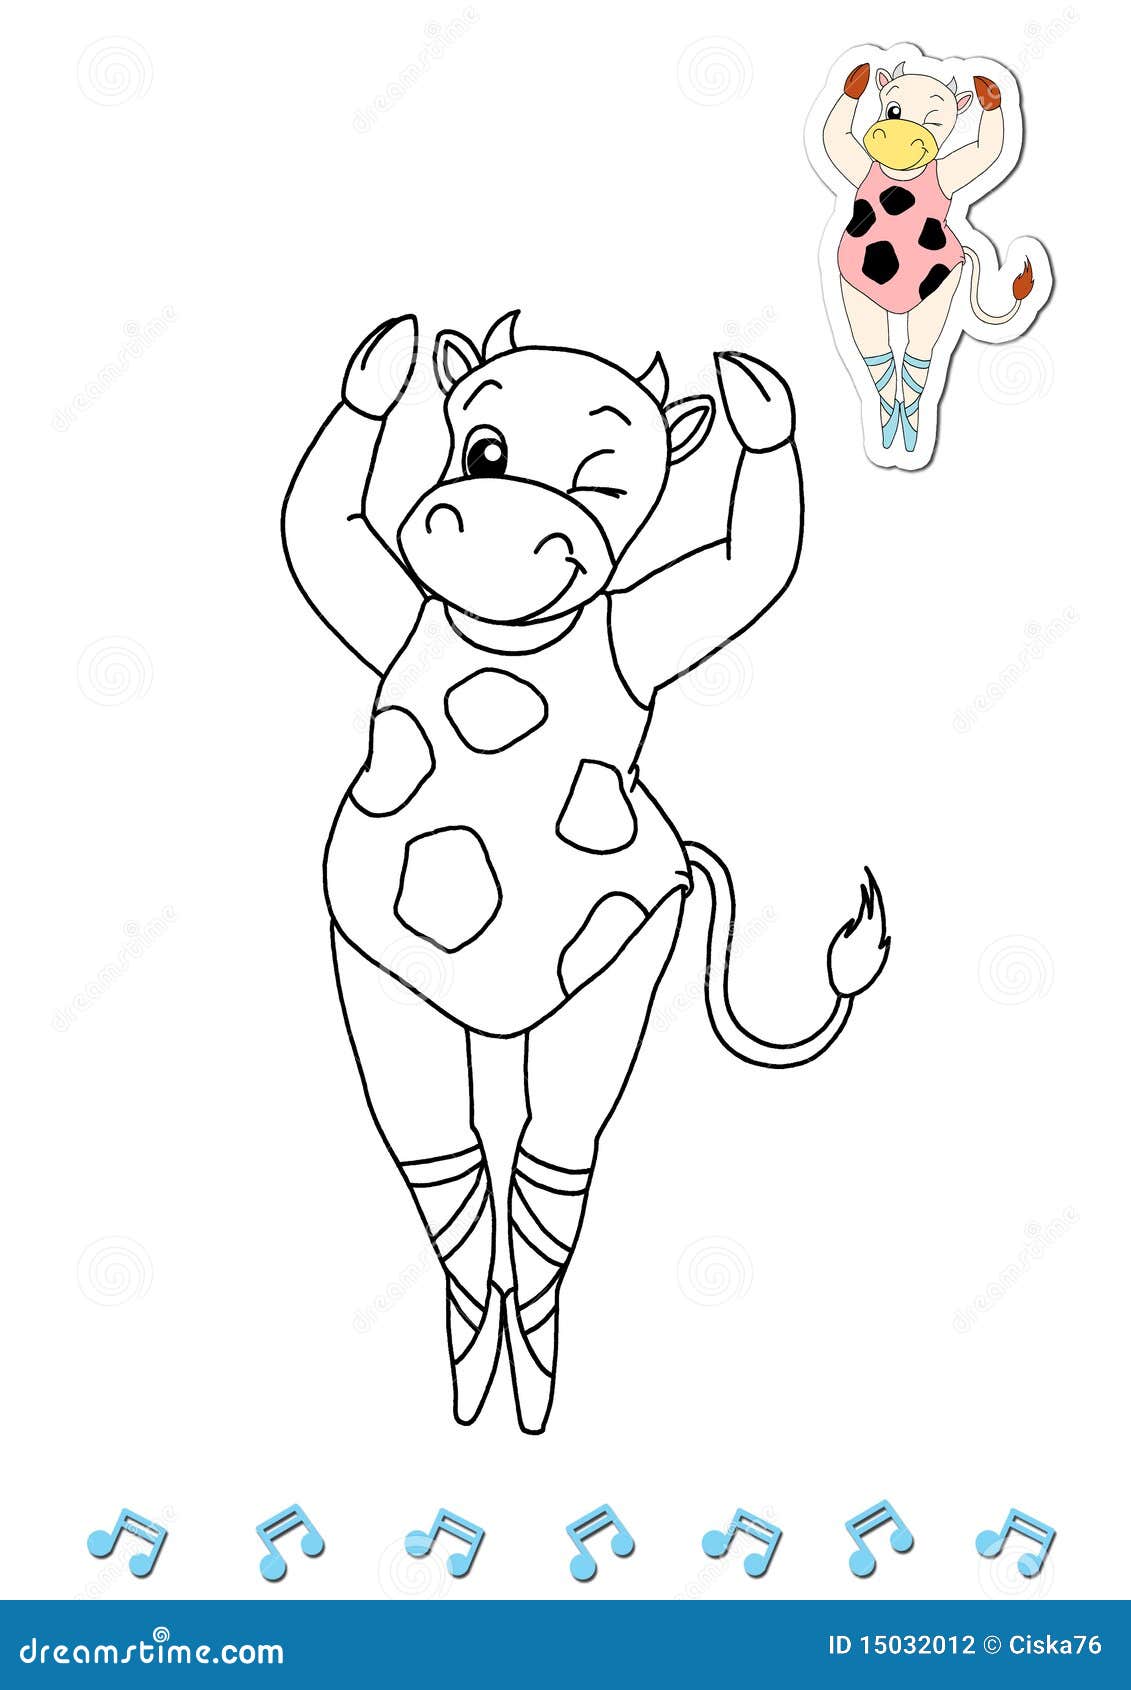 coloring book animal dancers 1 - cow